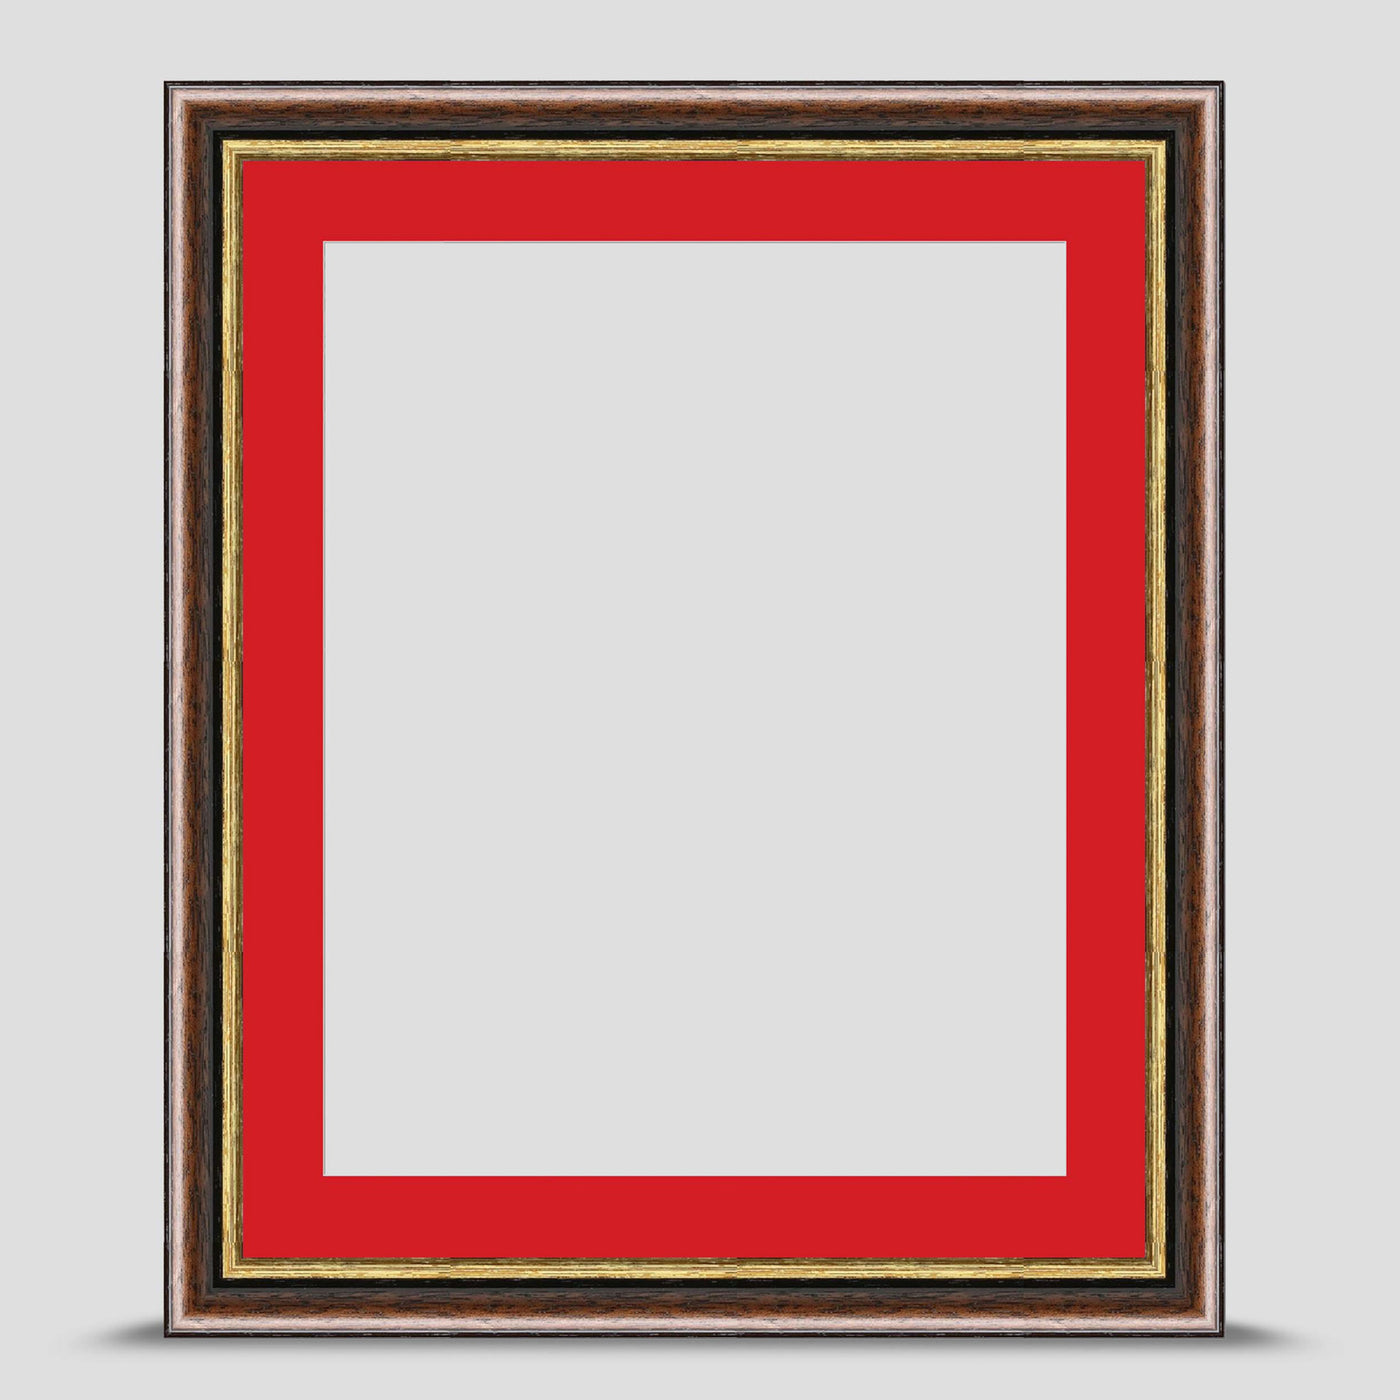 12x10 Brown & Gold Picture Frame with a 10x8 Mount